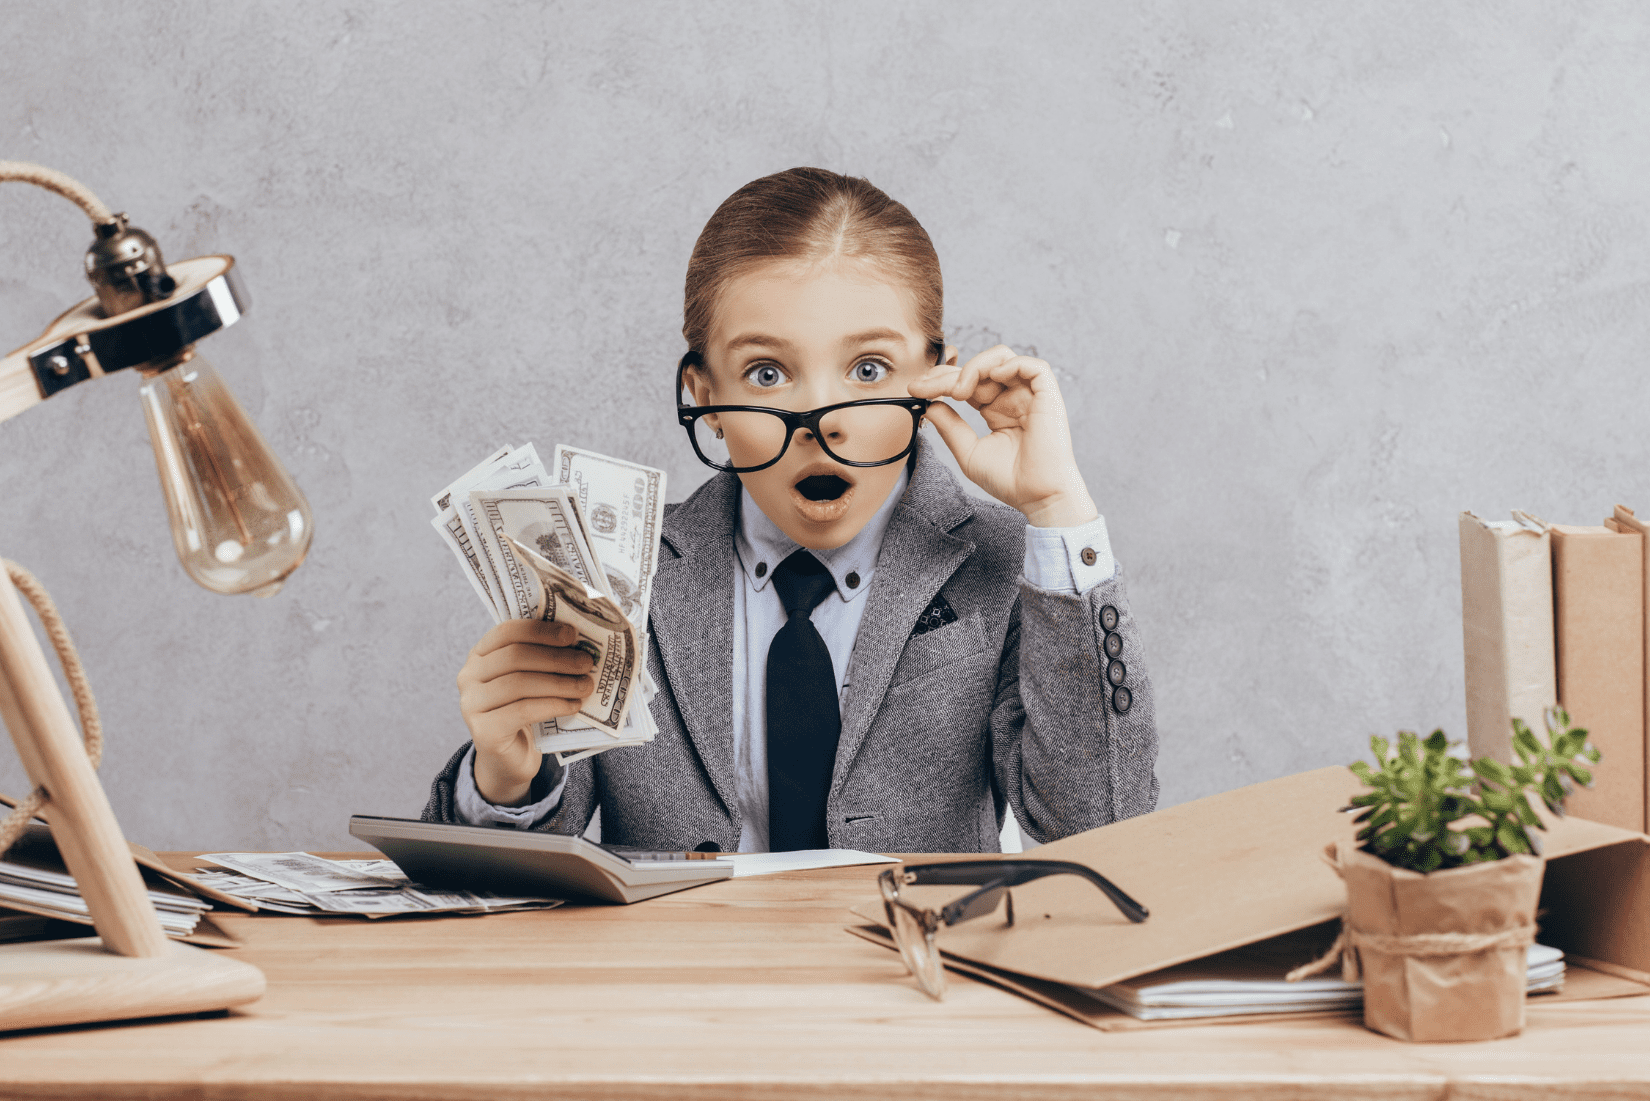 Child, in a business suit with glasses, holding money. She is surprised.